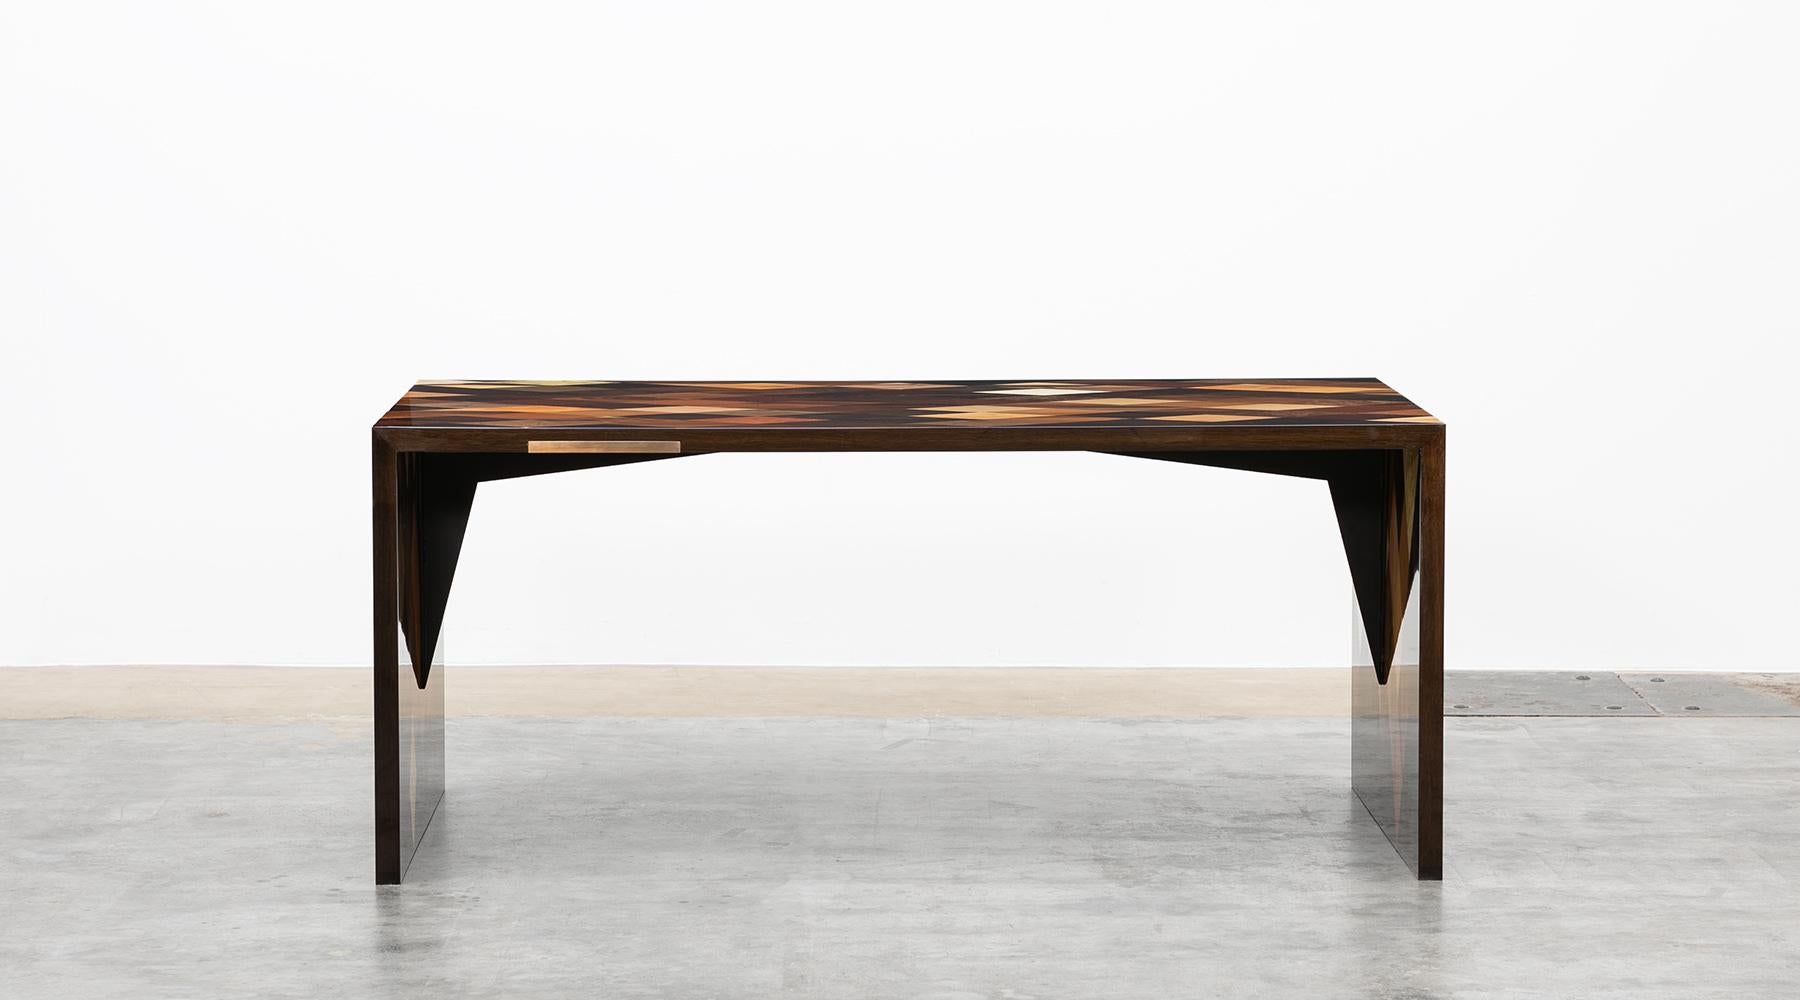 Desk by contemporary German artist Johannes Hock.
Its archetypical and reduced form in interaction with the marquetry of the shell unfolds the special attraction of the piece.
The table is made of diamond shaped veneers of various origin such as